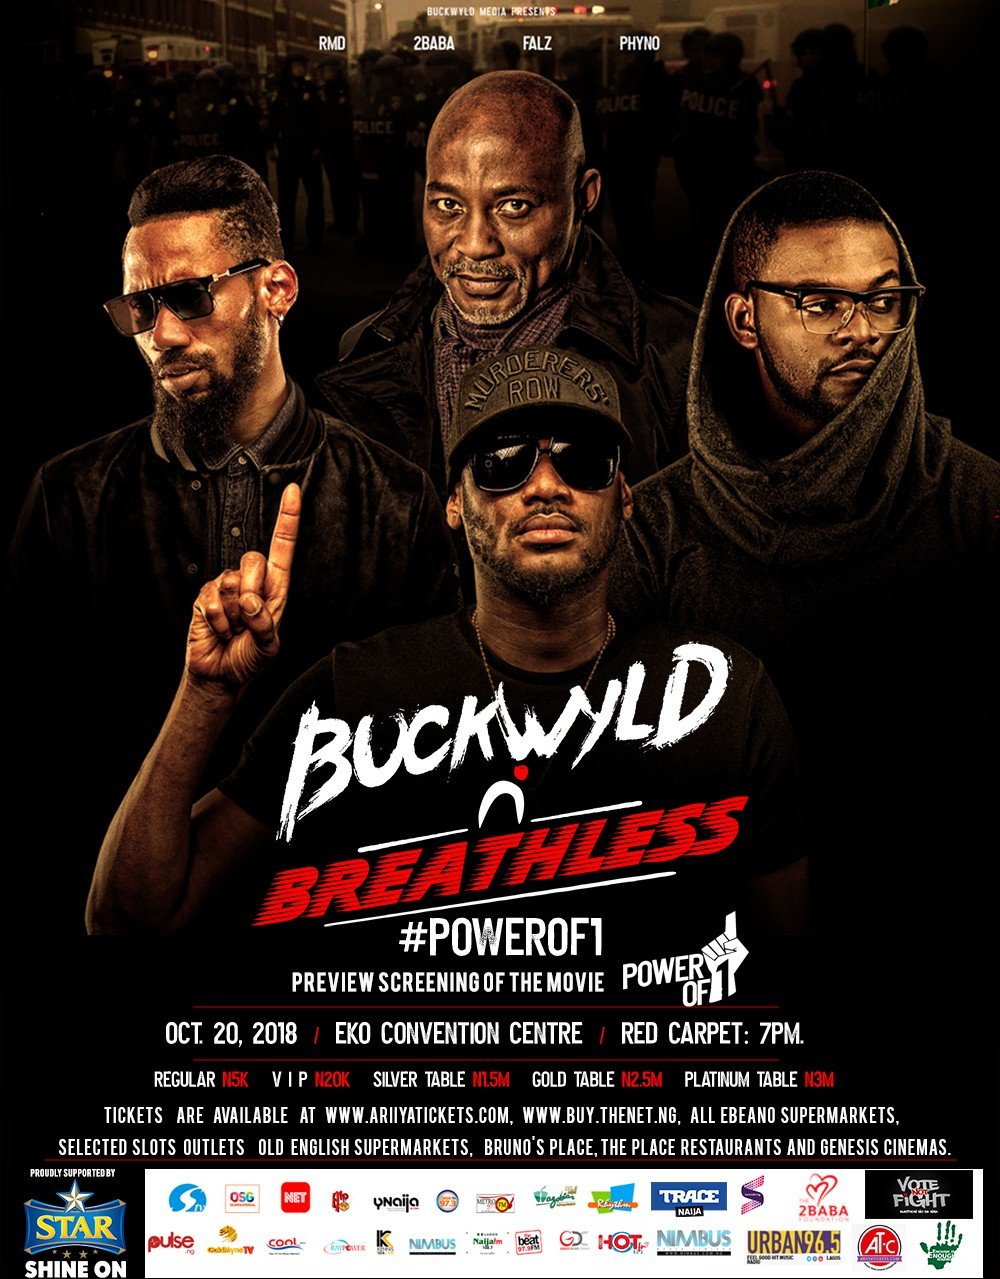 2face’s Buckwyld ‘n’ Breathless concert to hold on the 20th of October